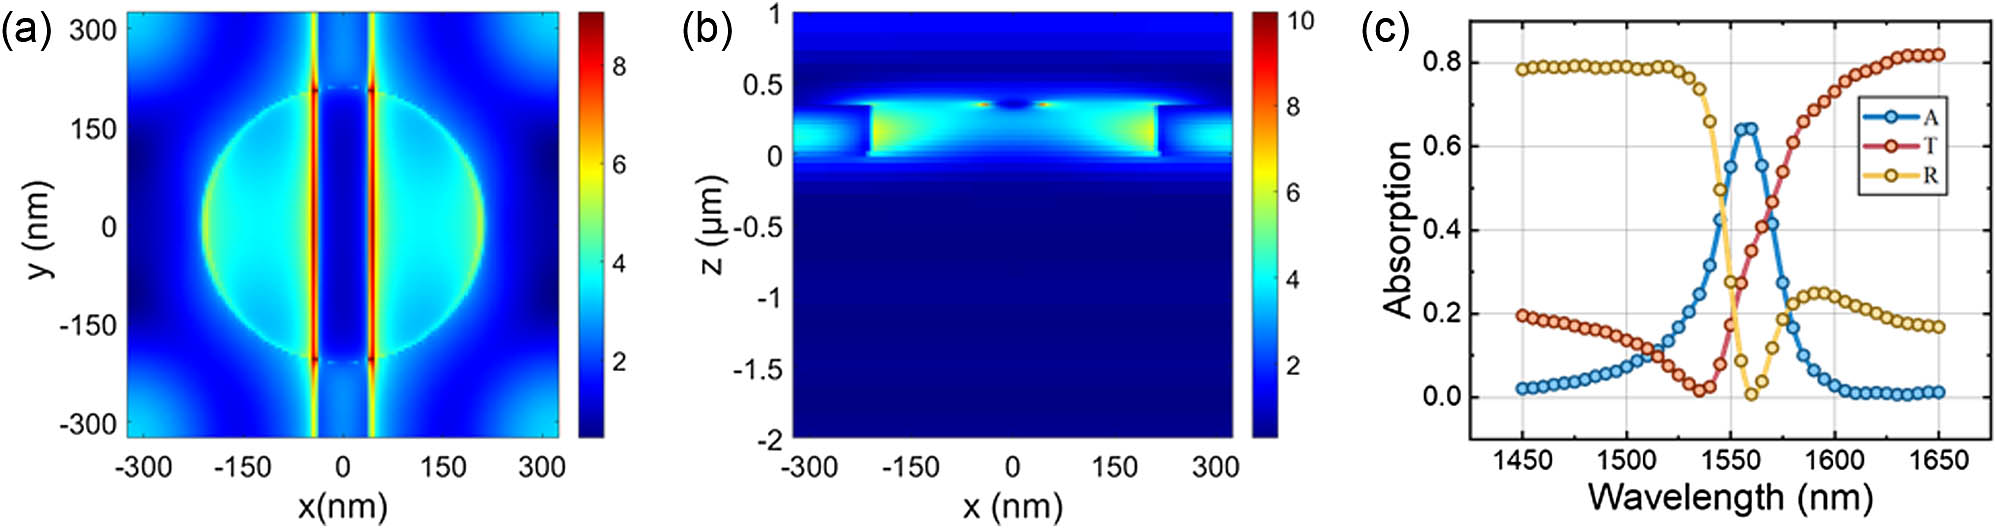 (a) Top and (b) side views of distribution of electric field intensity at 1550 nm for TE-polarized incident light. Absorption, reflection, and transmission of (c) nanowire integrated with PhC resonator.